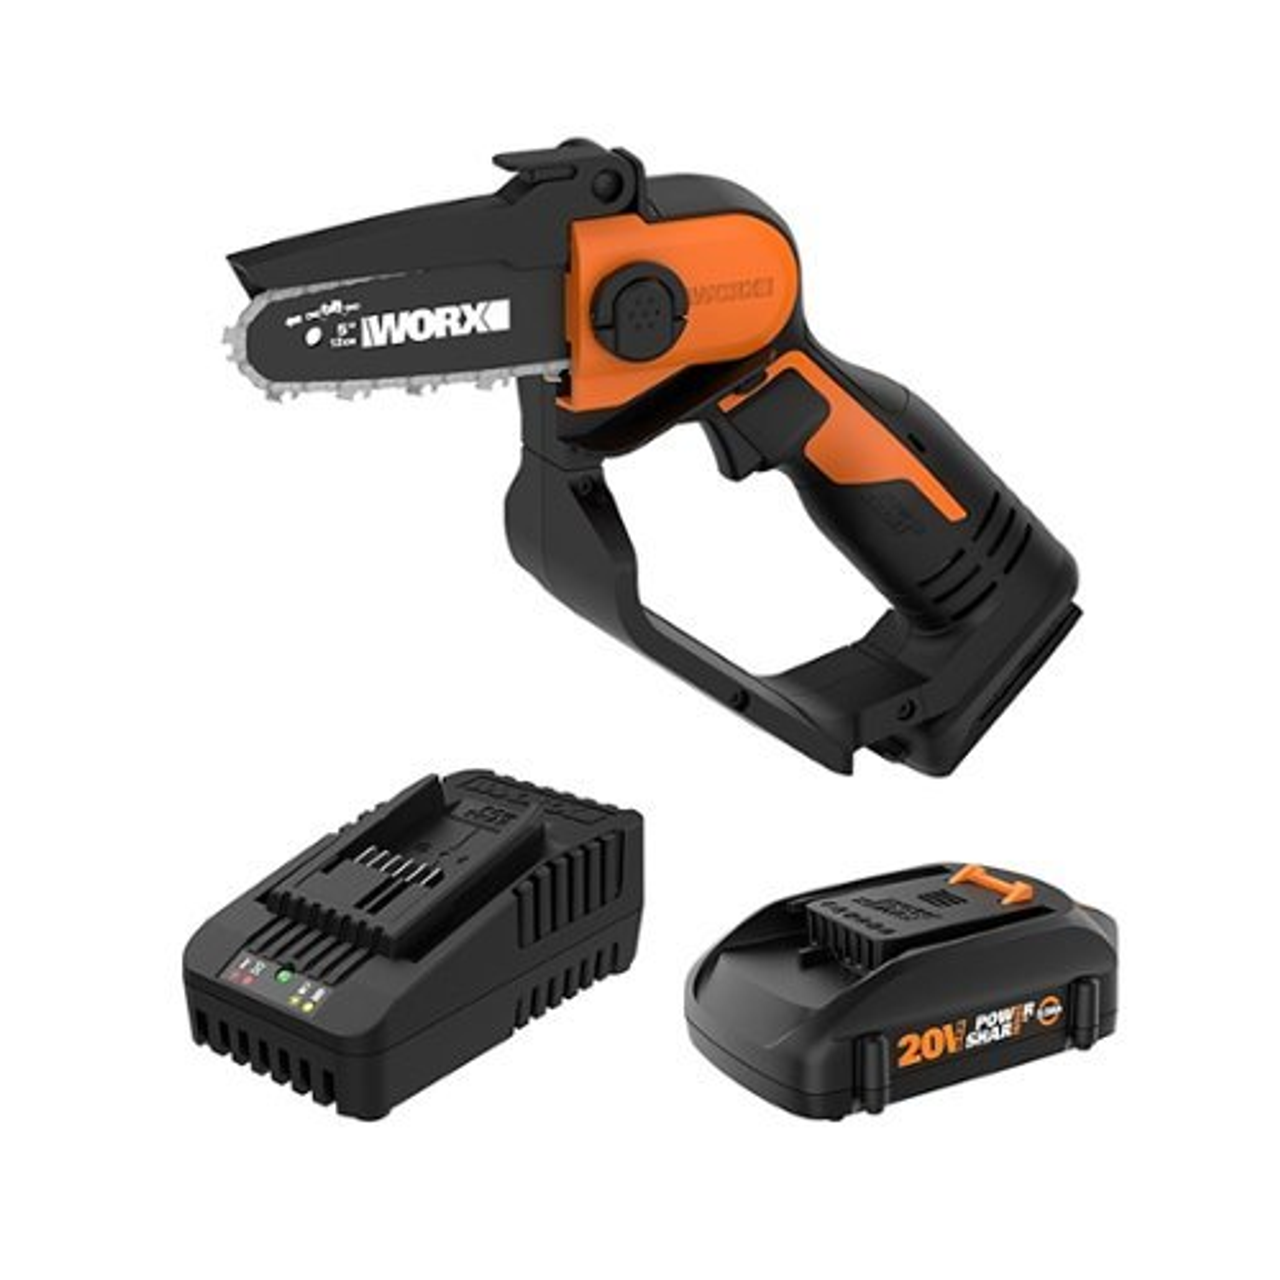 Worx WG324 20V Power Share 5" Cordless Pruning Saw (Battery and Charger Included) - Black